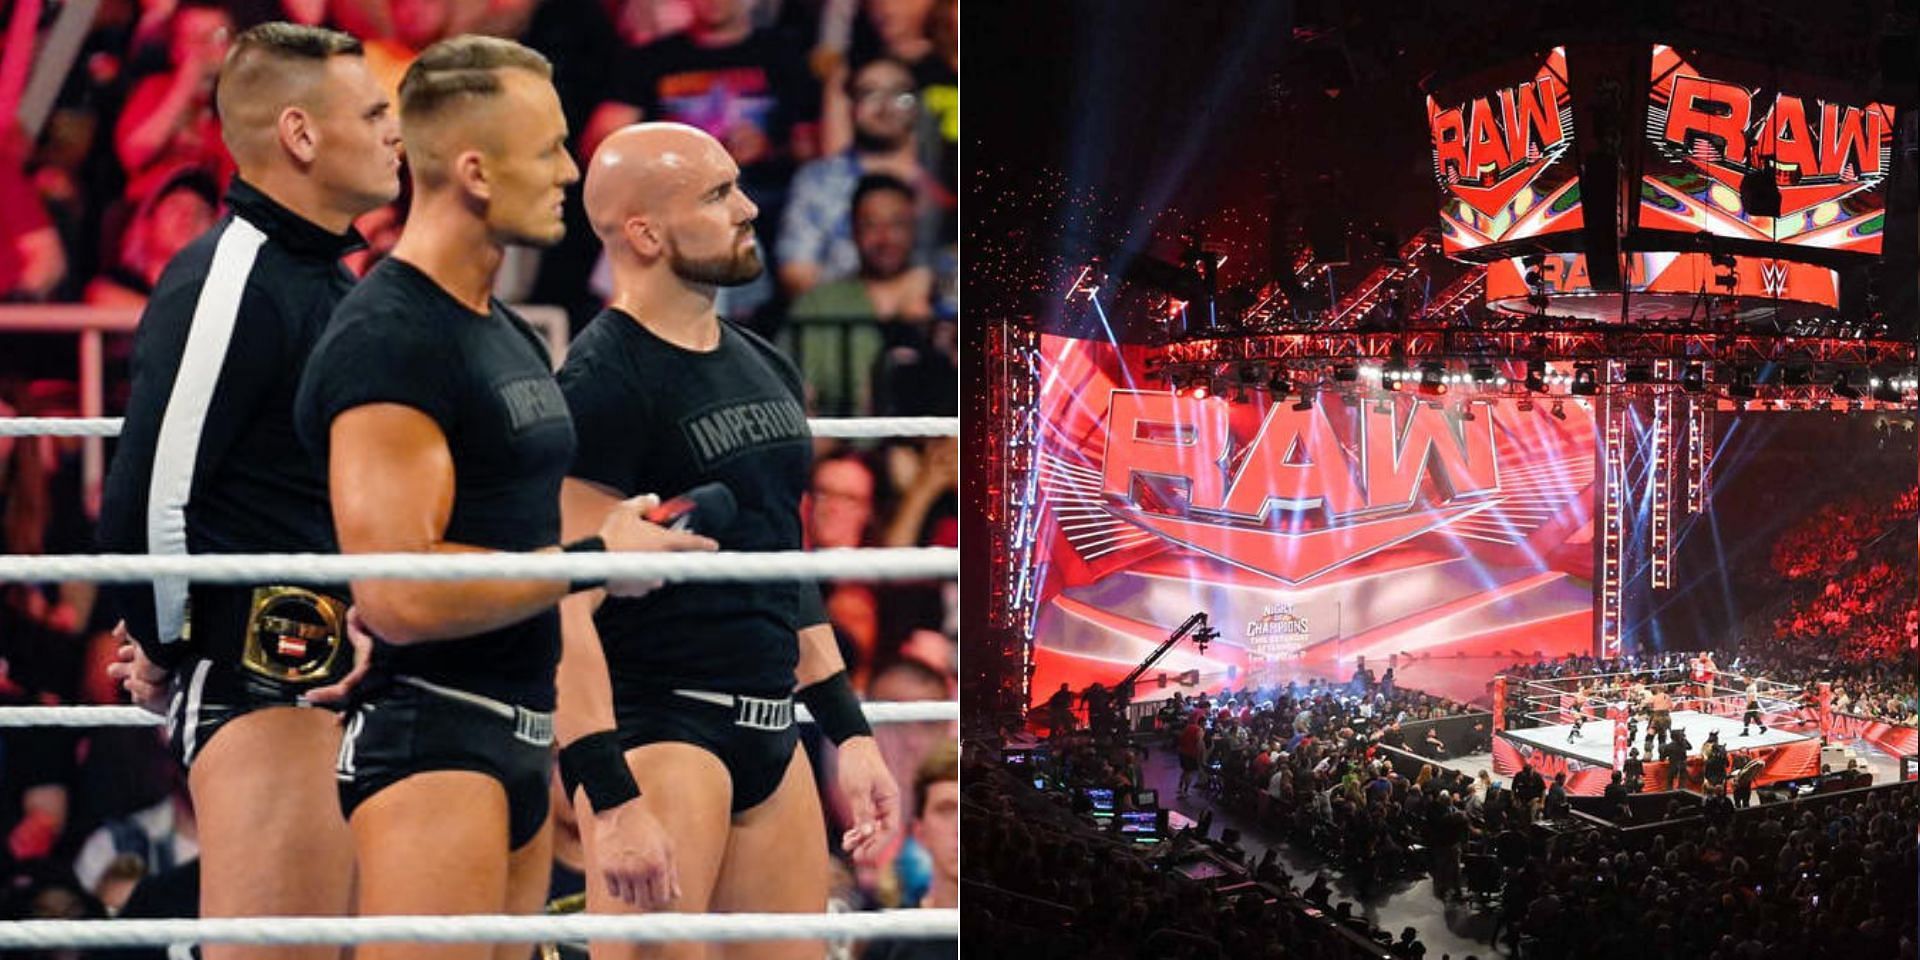 An Imperium member was involved in a huge brawl on RAW